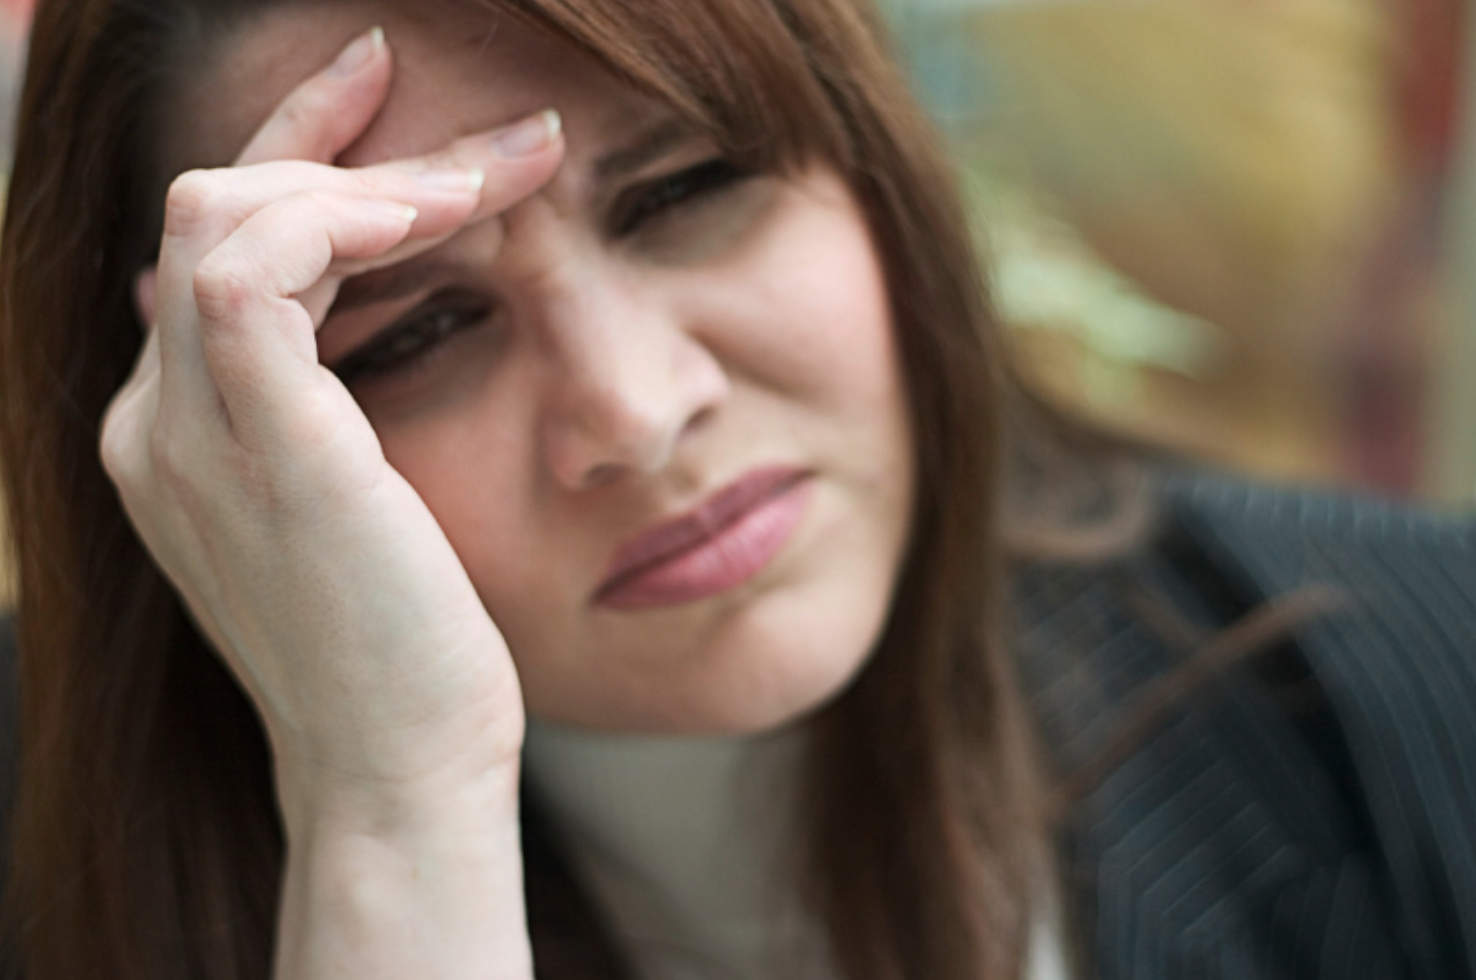 Pharmacist Medication Insights: Aimovig for Migraines